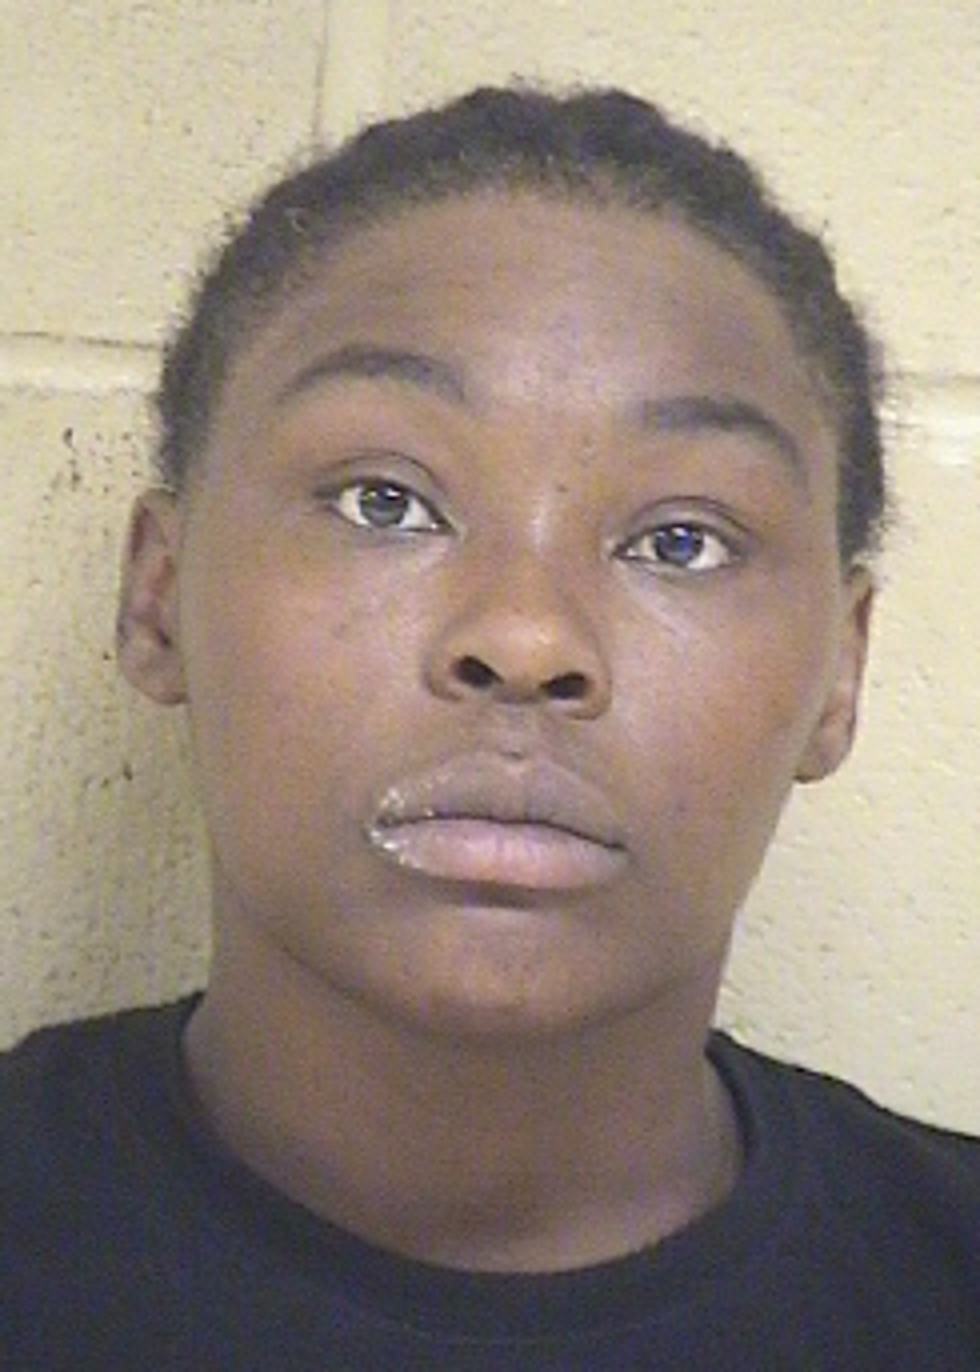 Dallas Woman Arrested for Human Trafficking of a Juvenile